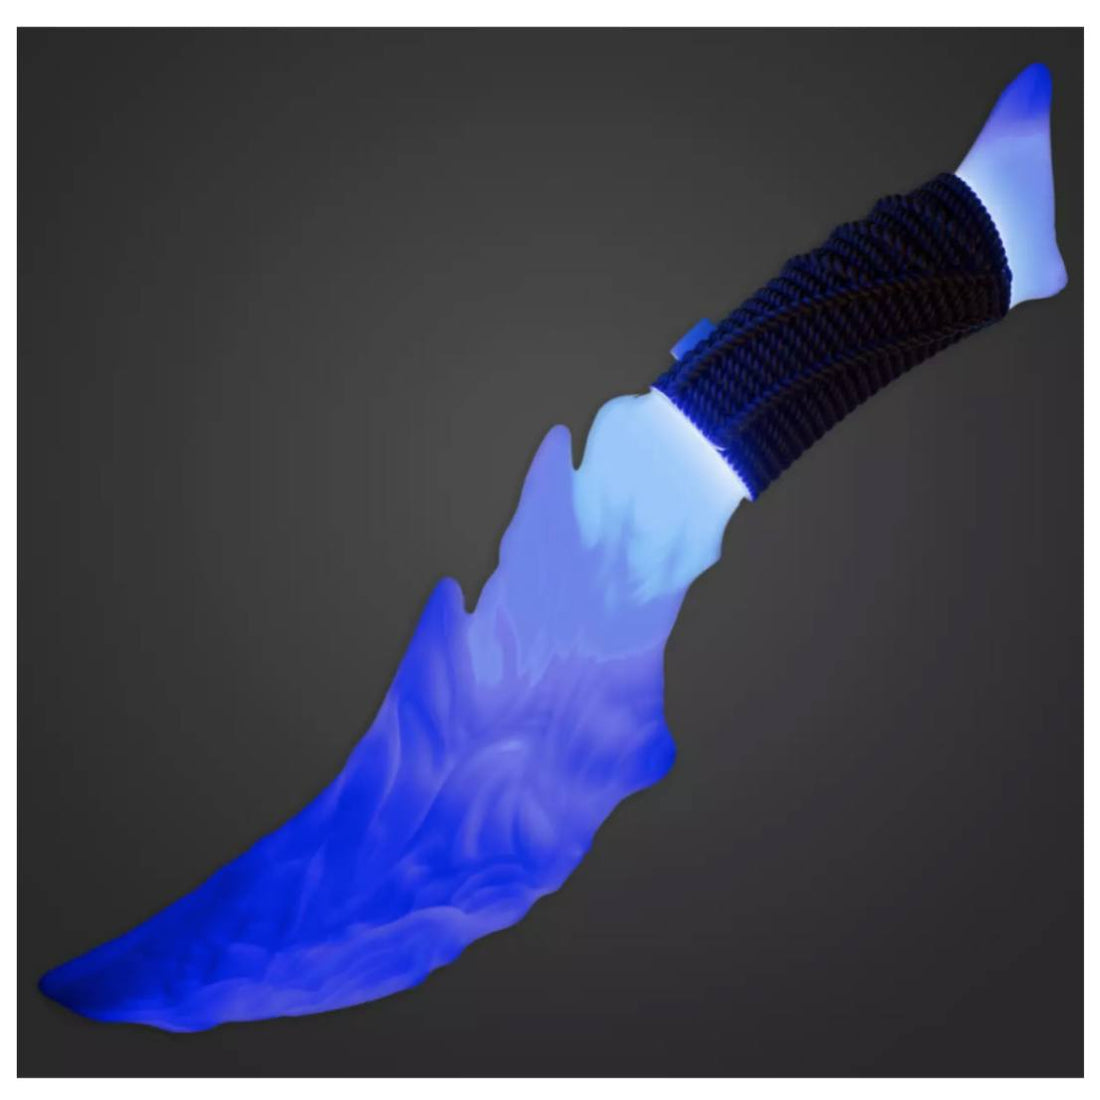 Disney Avatar: The Way of Water Light-Up Obsidian Knife Toy